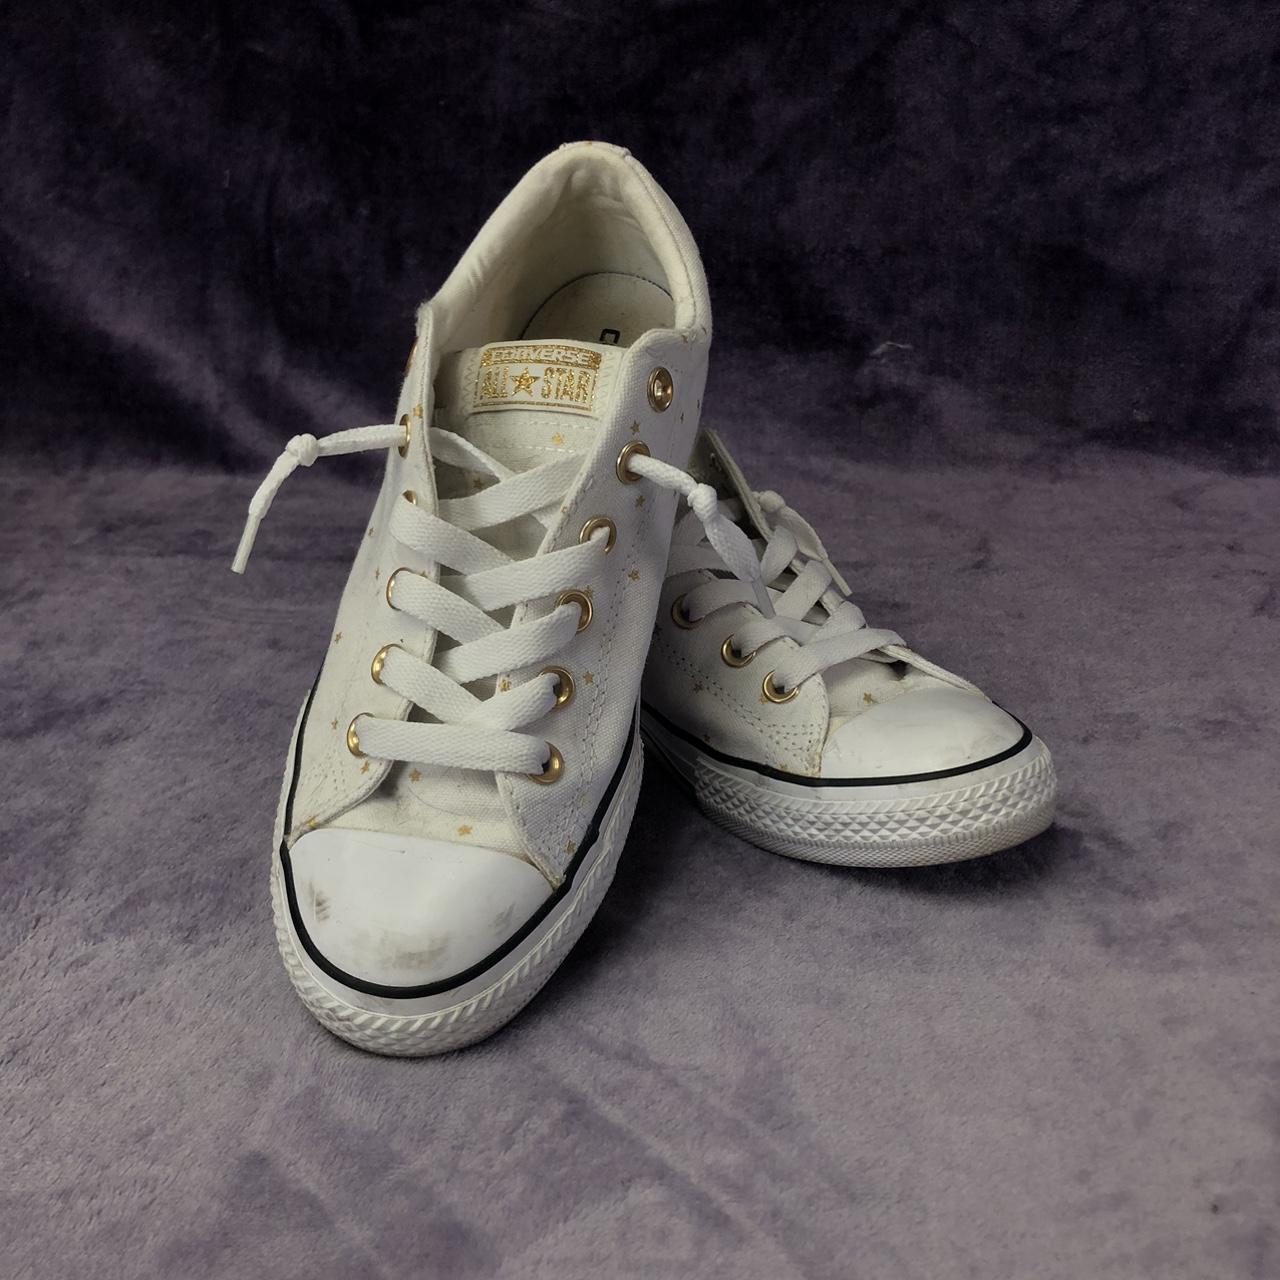 OBO chuck converse low-tops, worn once or... Depop